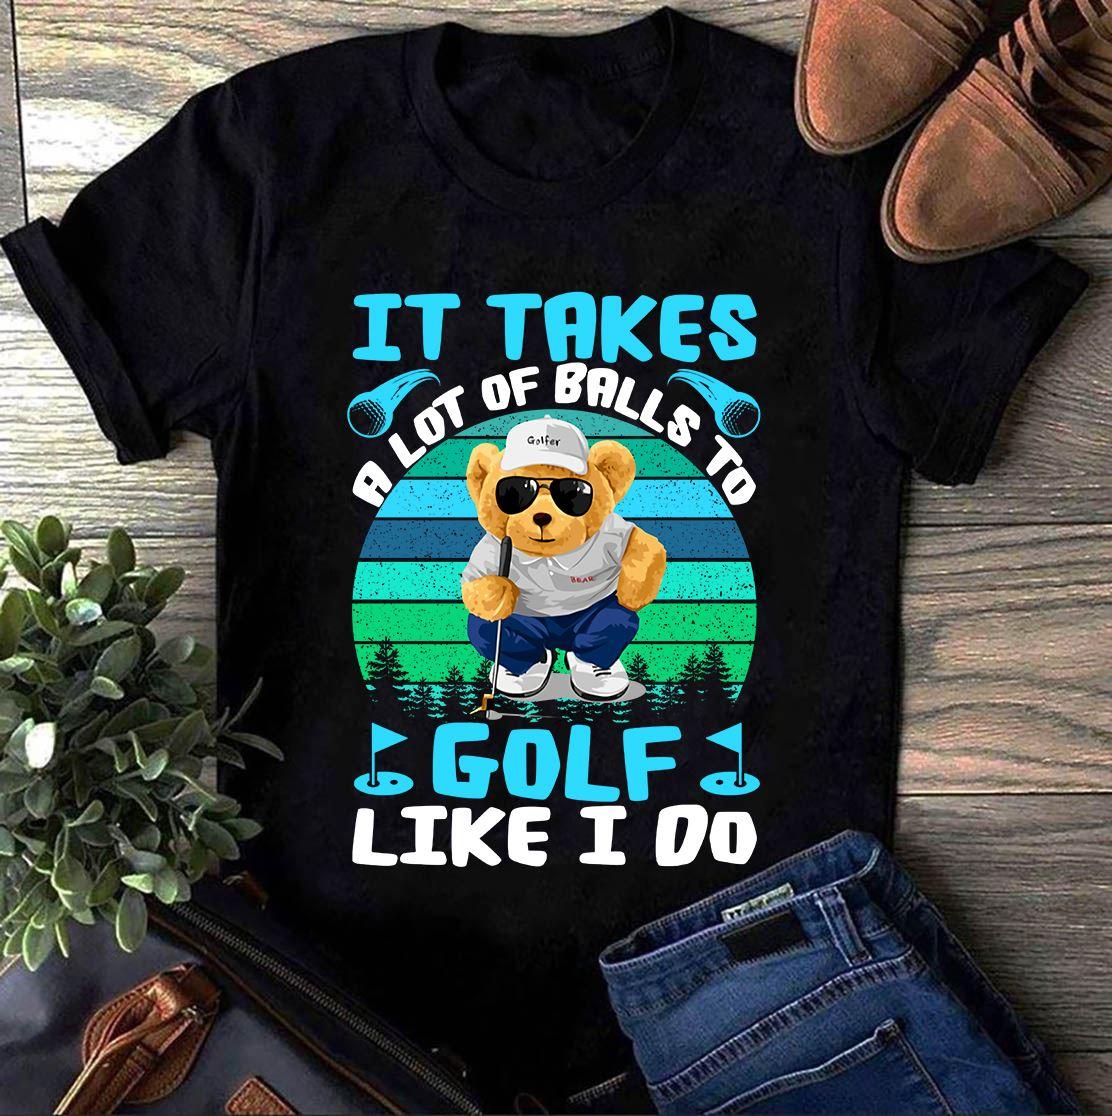 Bear Golf - It takes a lot of balls to golf like i do